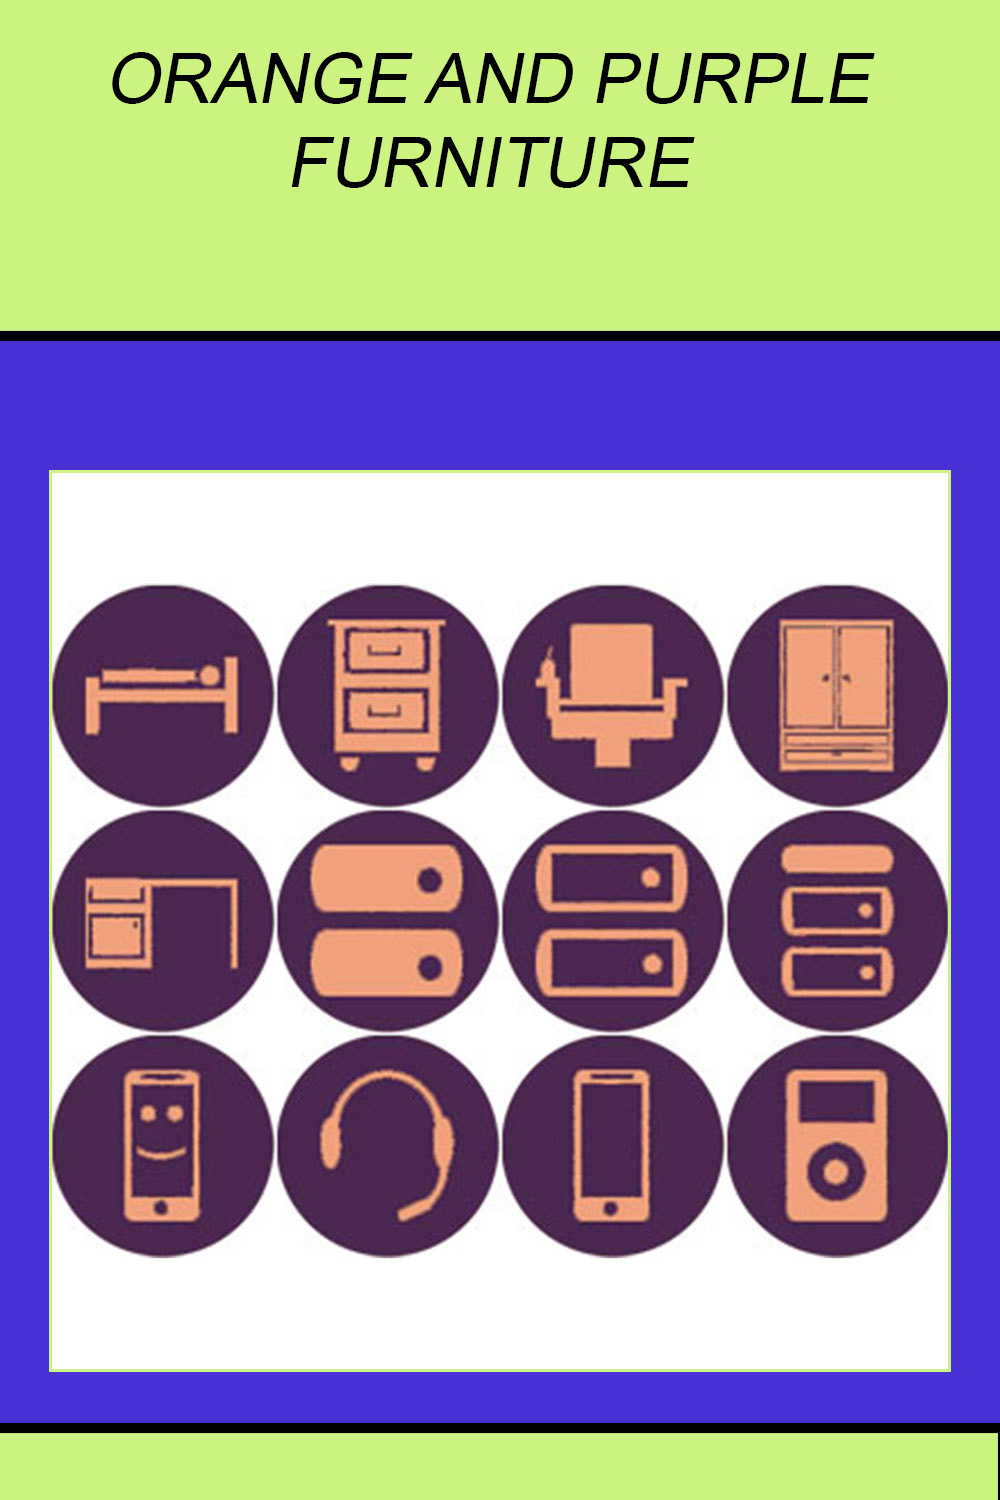 ORANGE AND PURPLE FURNITURE ROUND ICONS pinterest preview image.